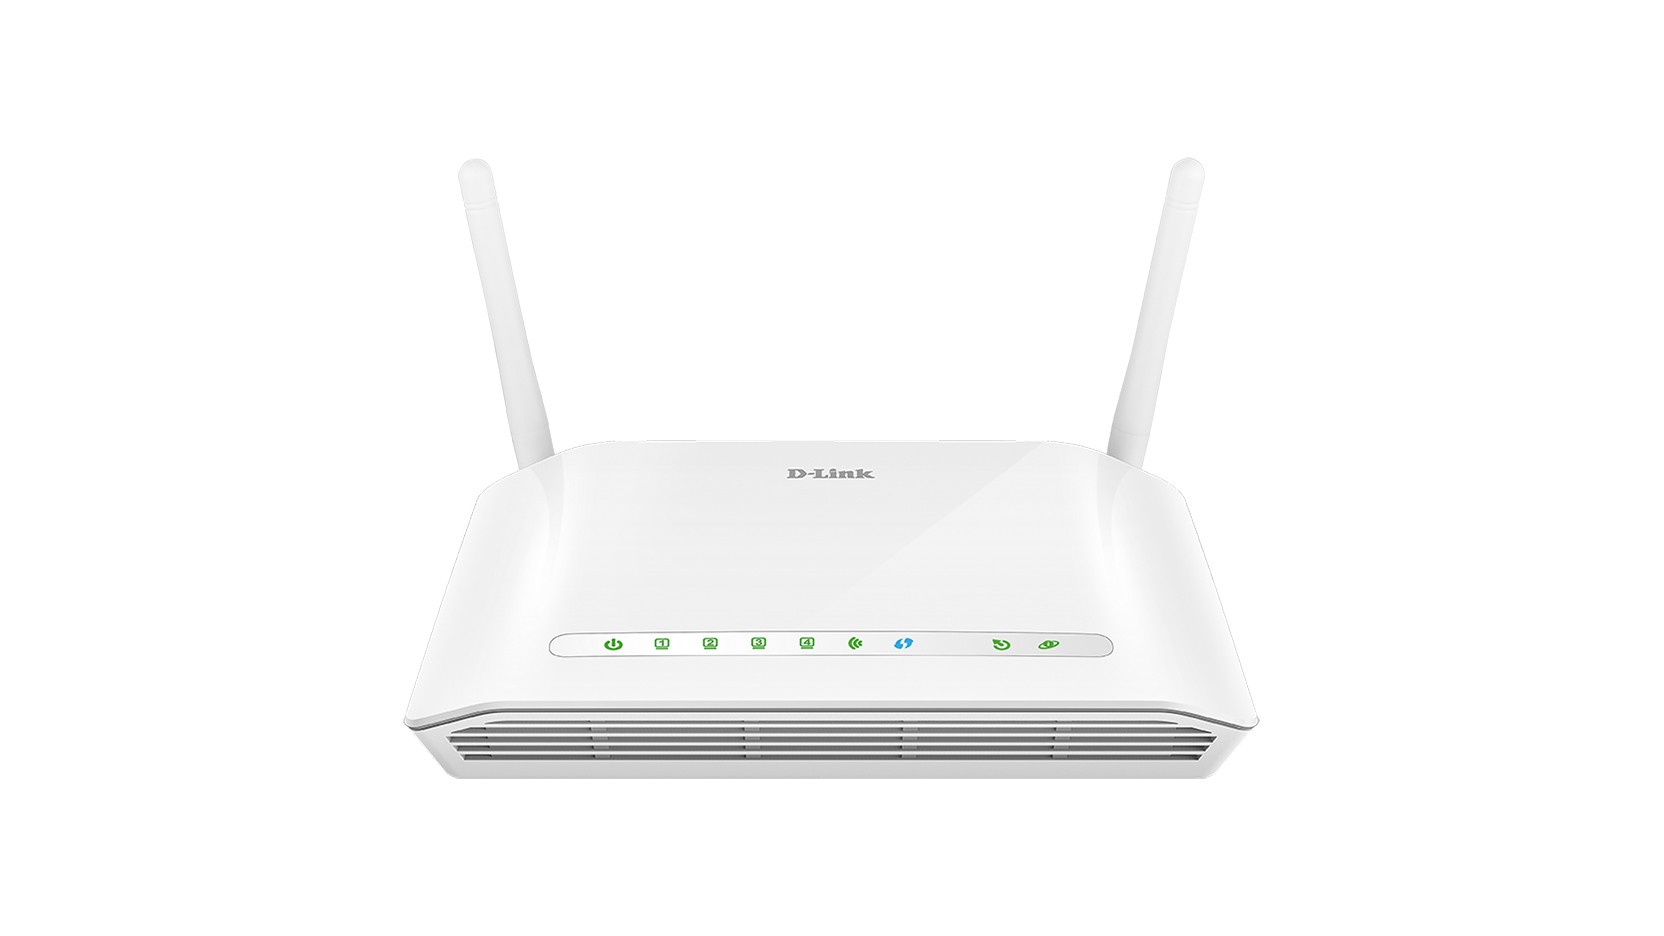 Modem Router 4 Porte Tp-Link 300Mbps Wireless N Adsl2 + - Router - Esseshop  - Il tuo Partner in Informatica, PC e Networking